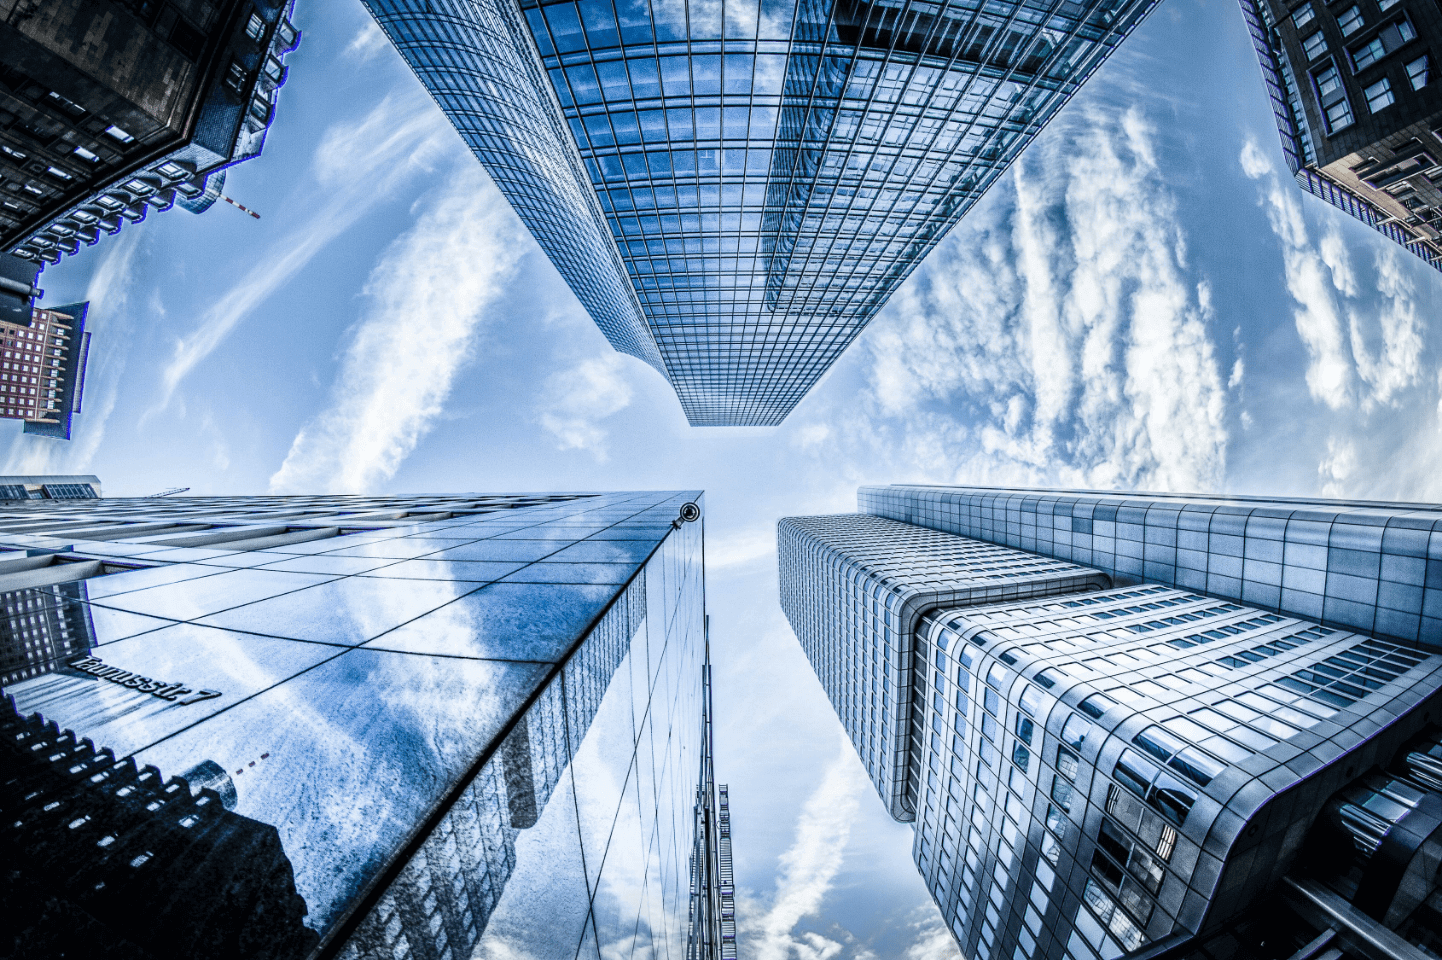 Image of a downtown area looking straight up between the highrises.